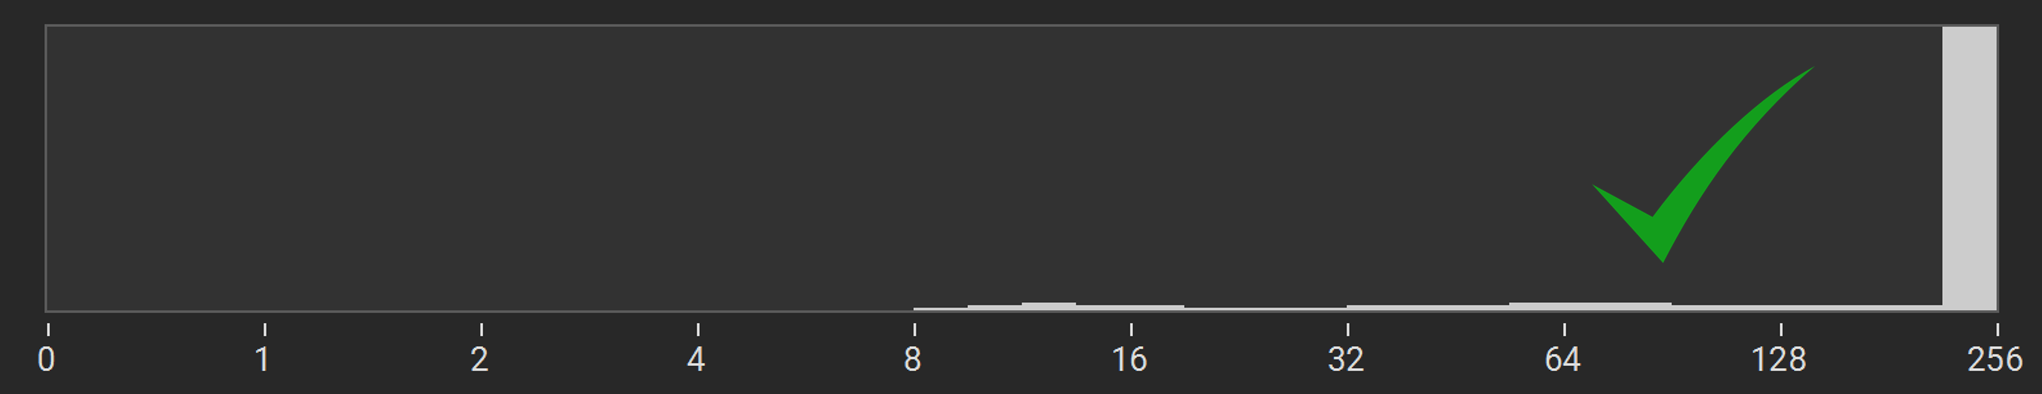 Histogram after finding third acquisition